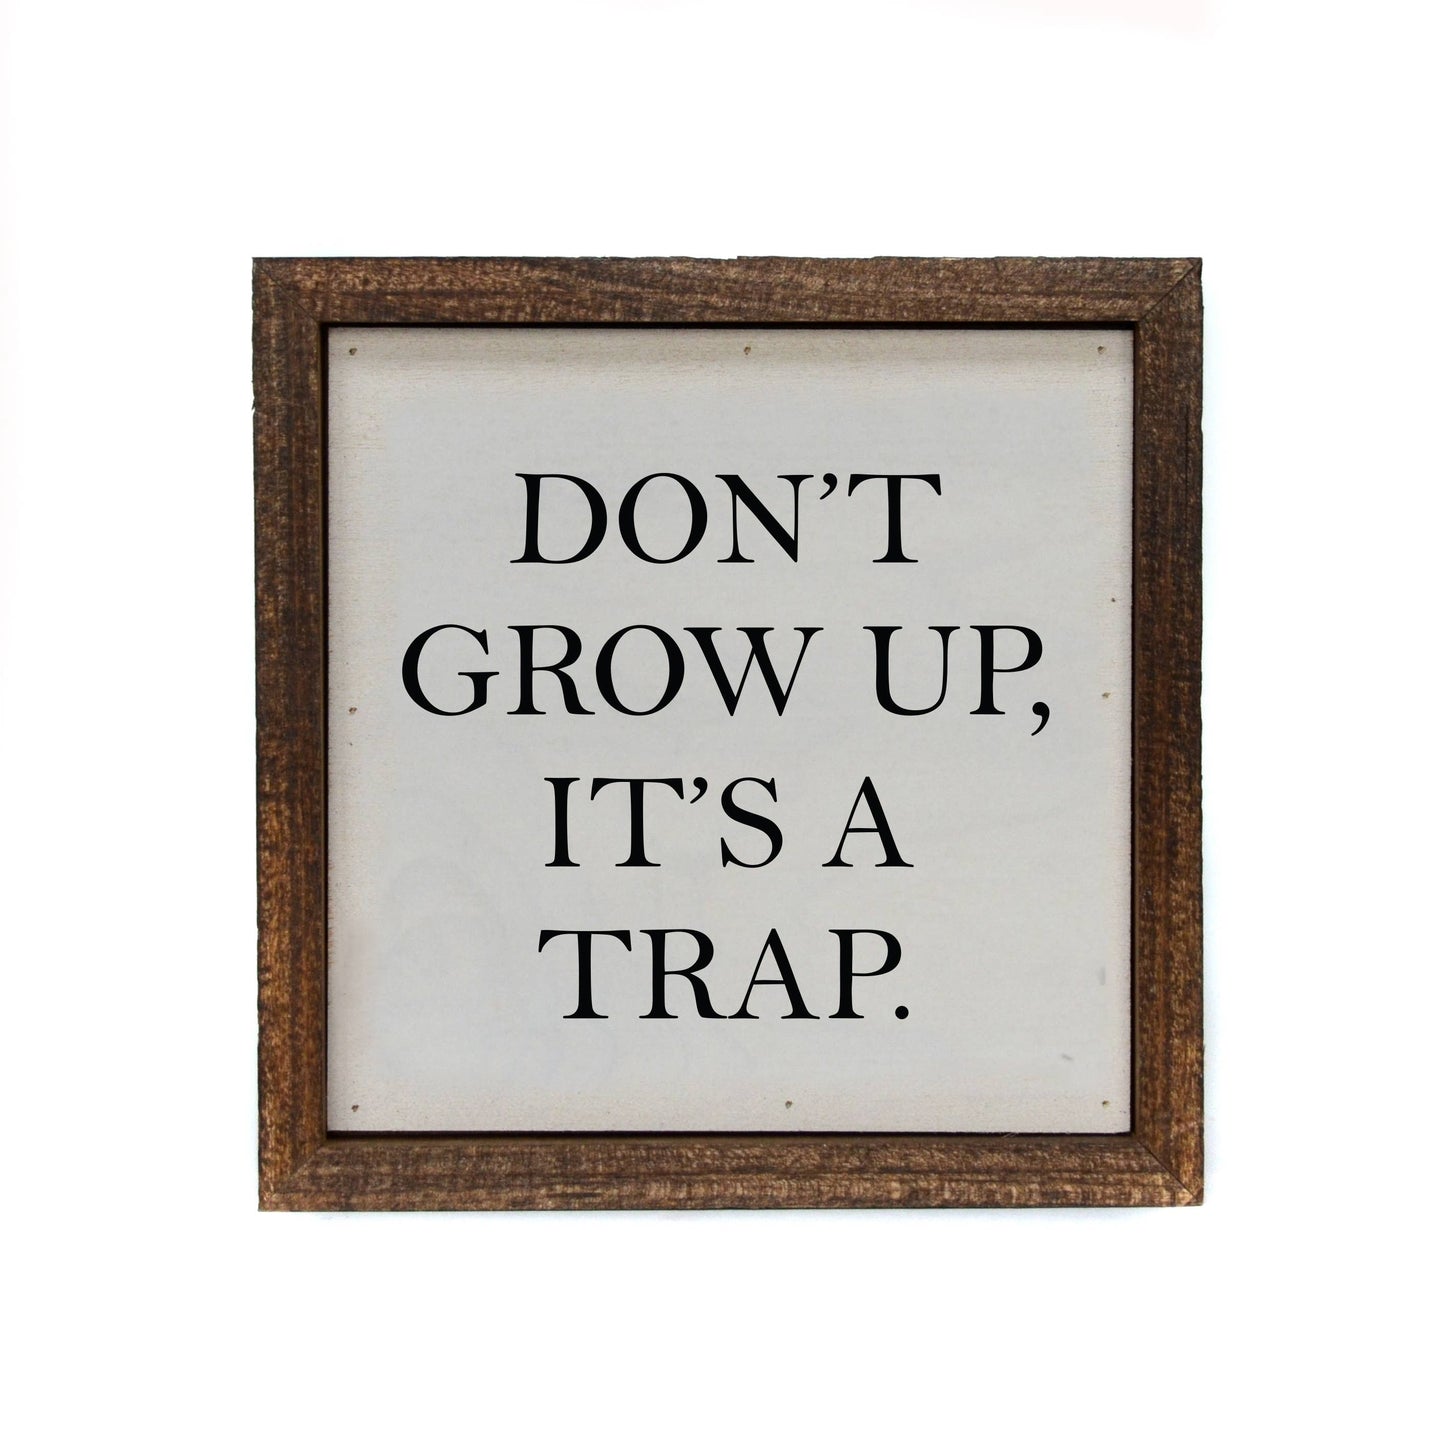 Don't Grow Up, It's A Trap 6x6 wood novelty sign